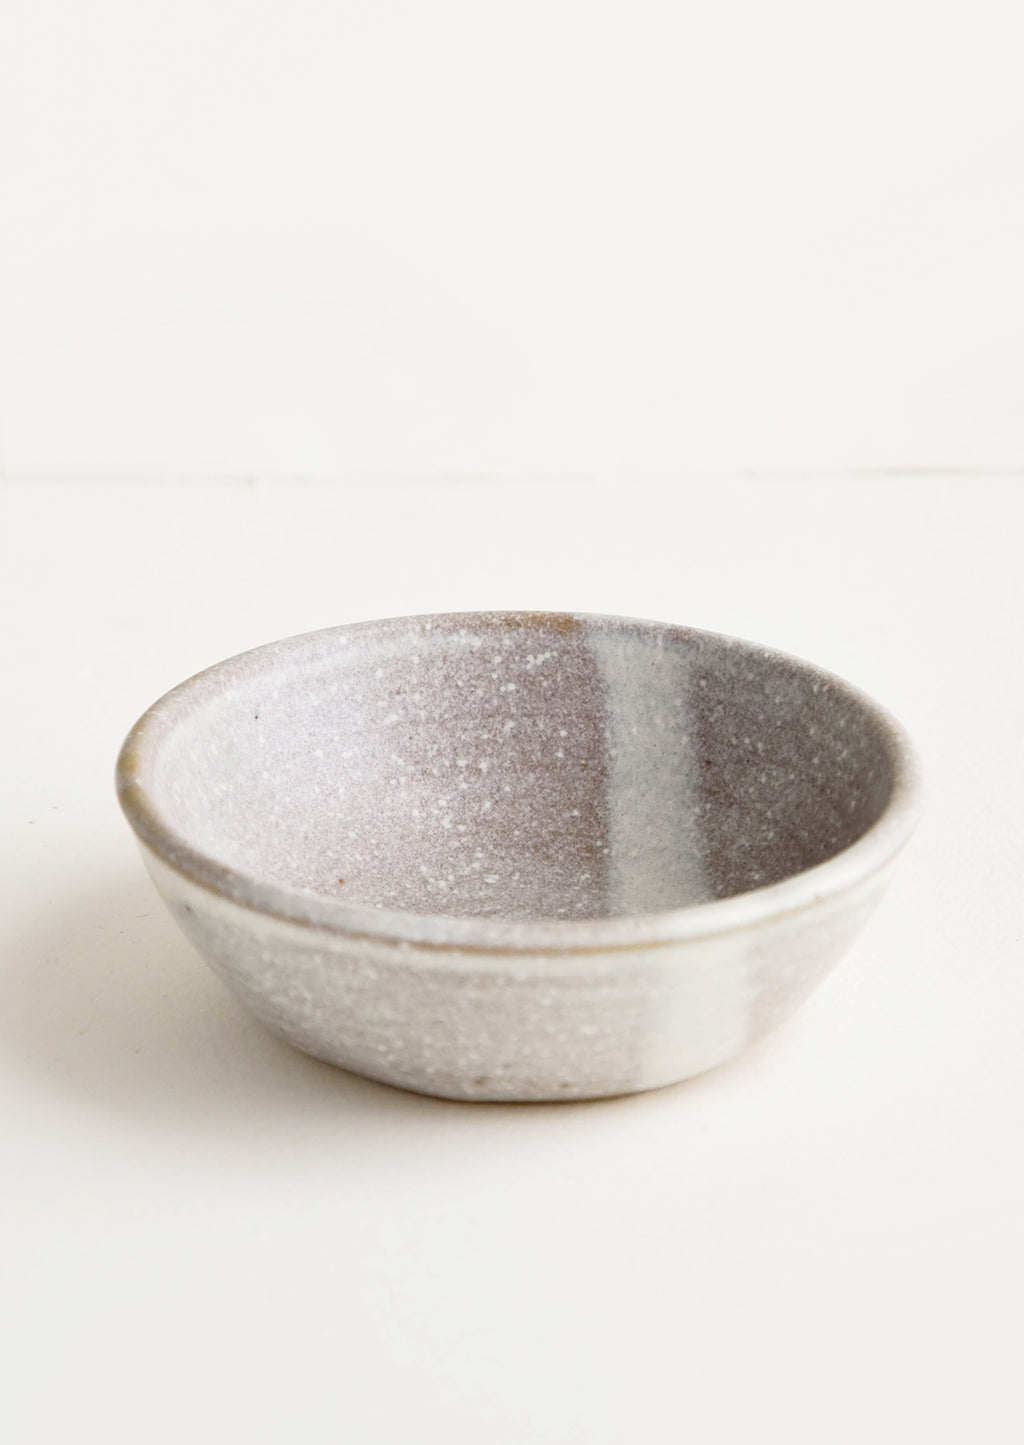 Pinch Bowl / Oat Speckle: Small, handmade ceramic pinch bowl in speckled light brown and white glaze